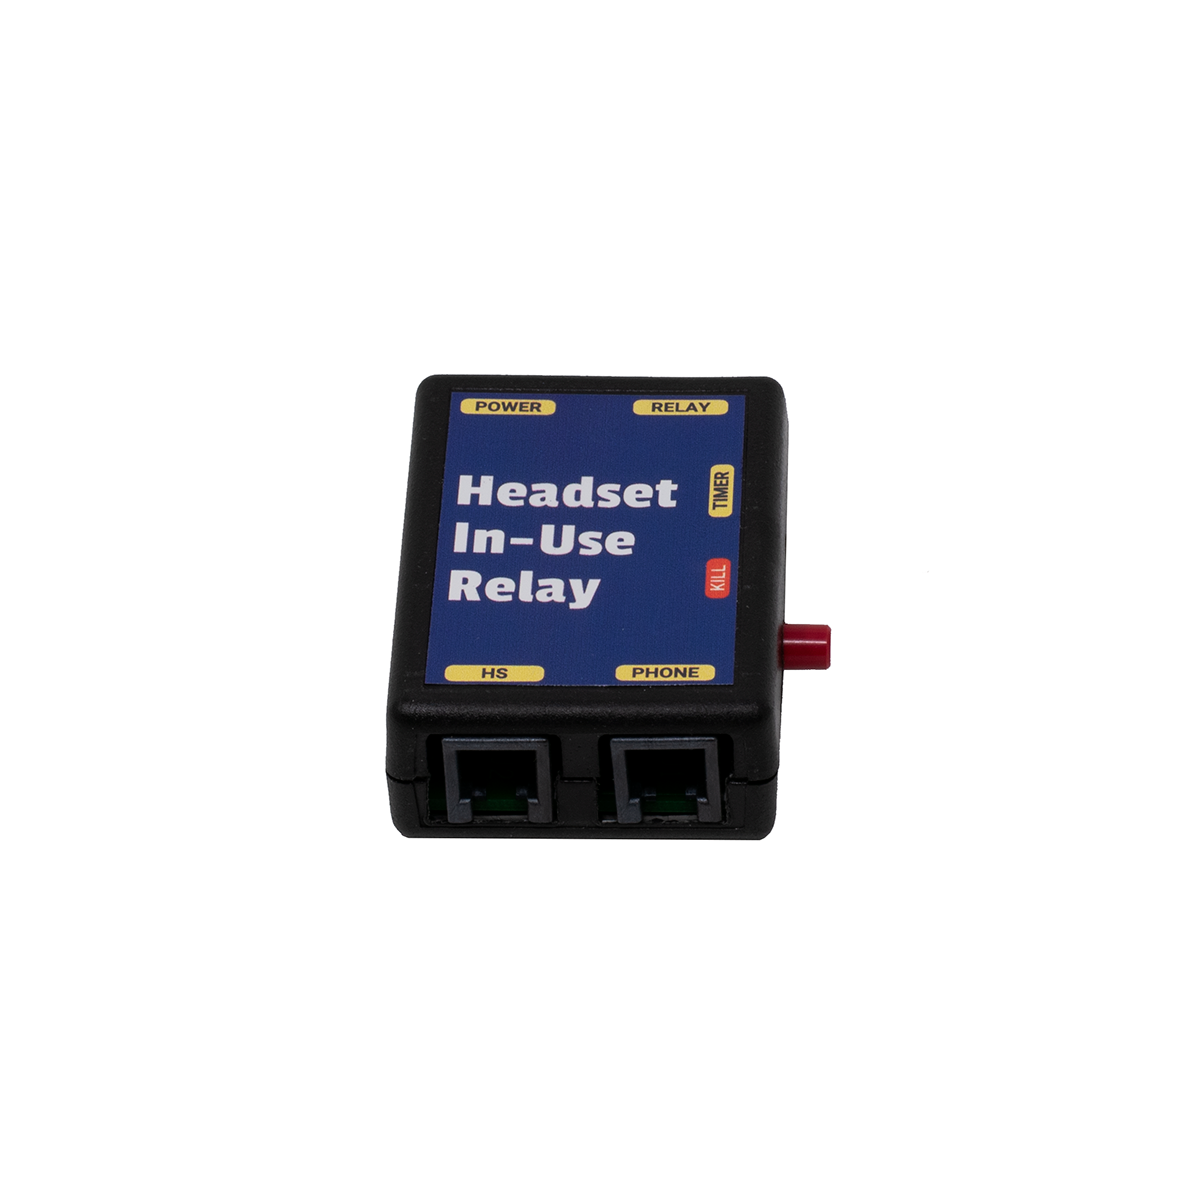 Headset In-Use Relay (Front Jack View)